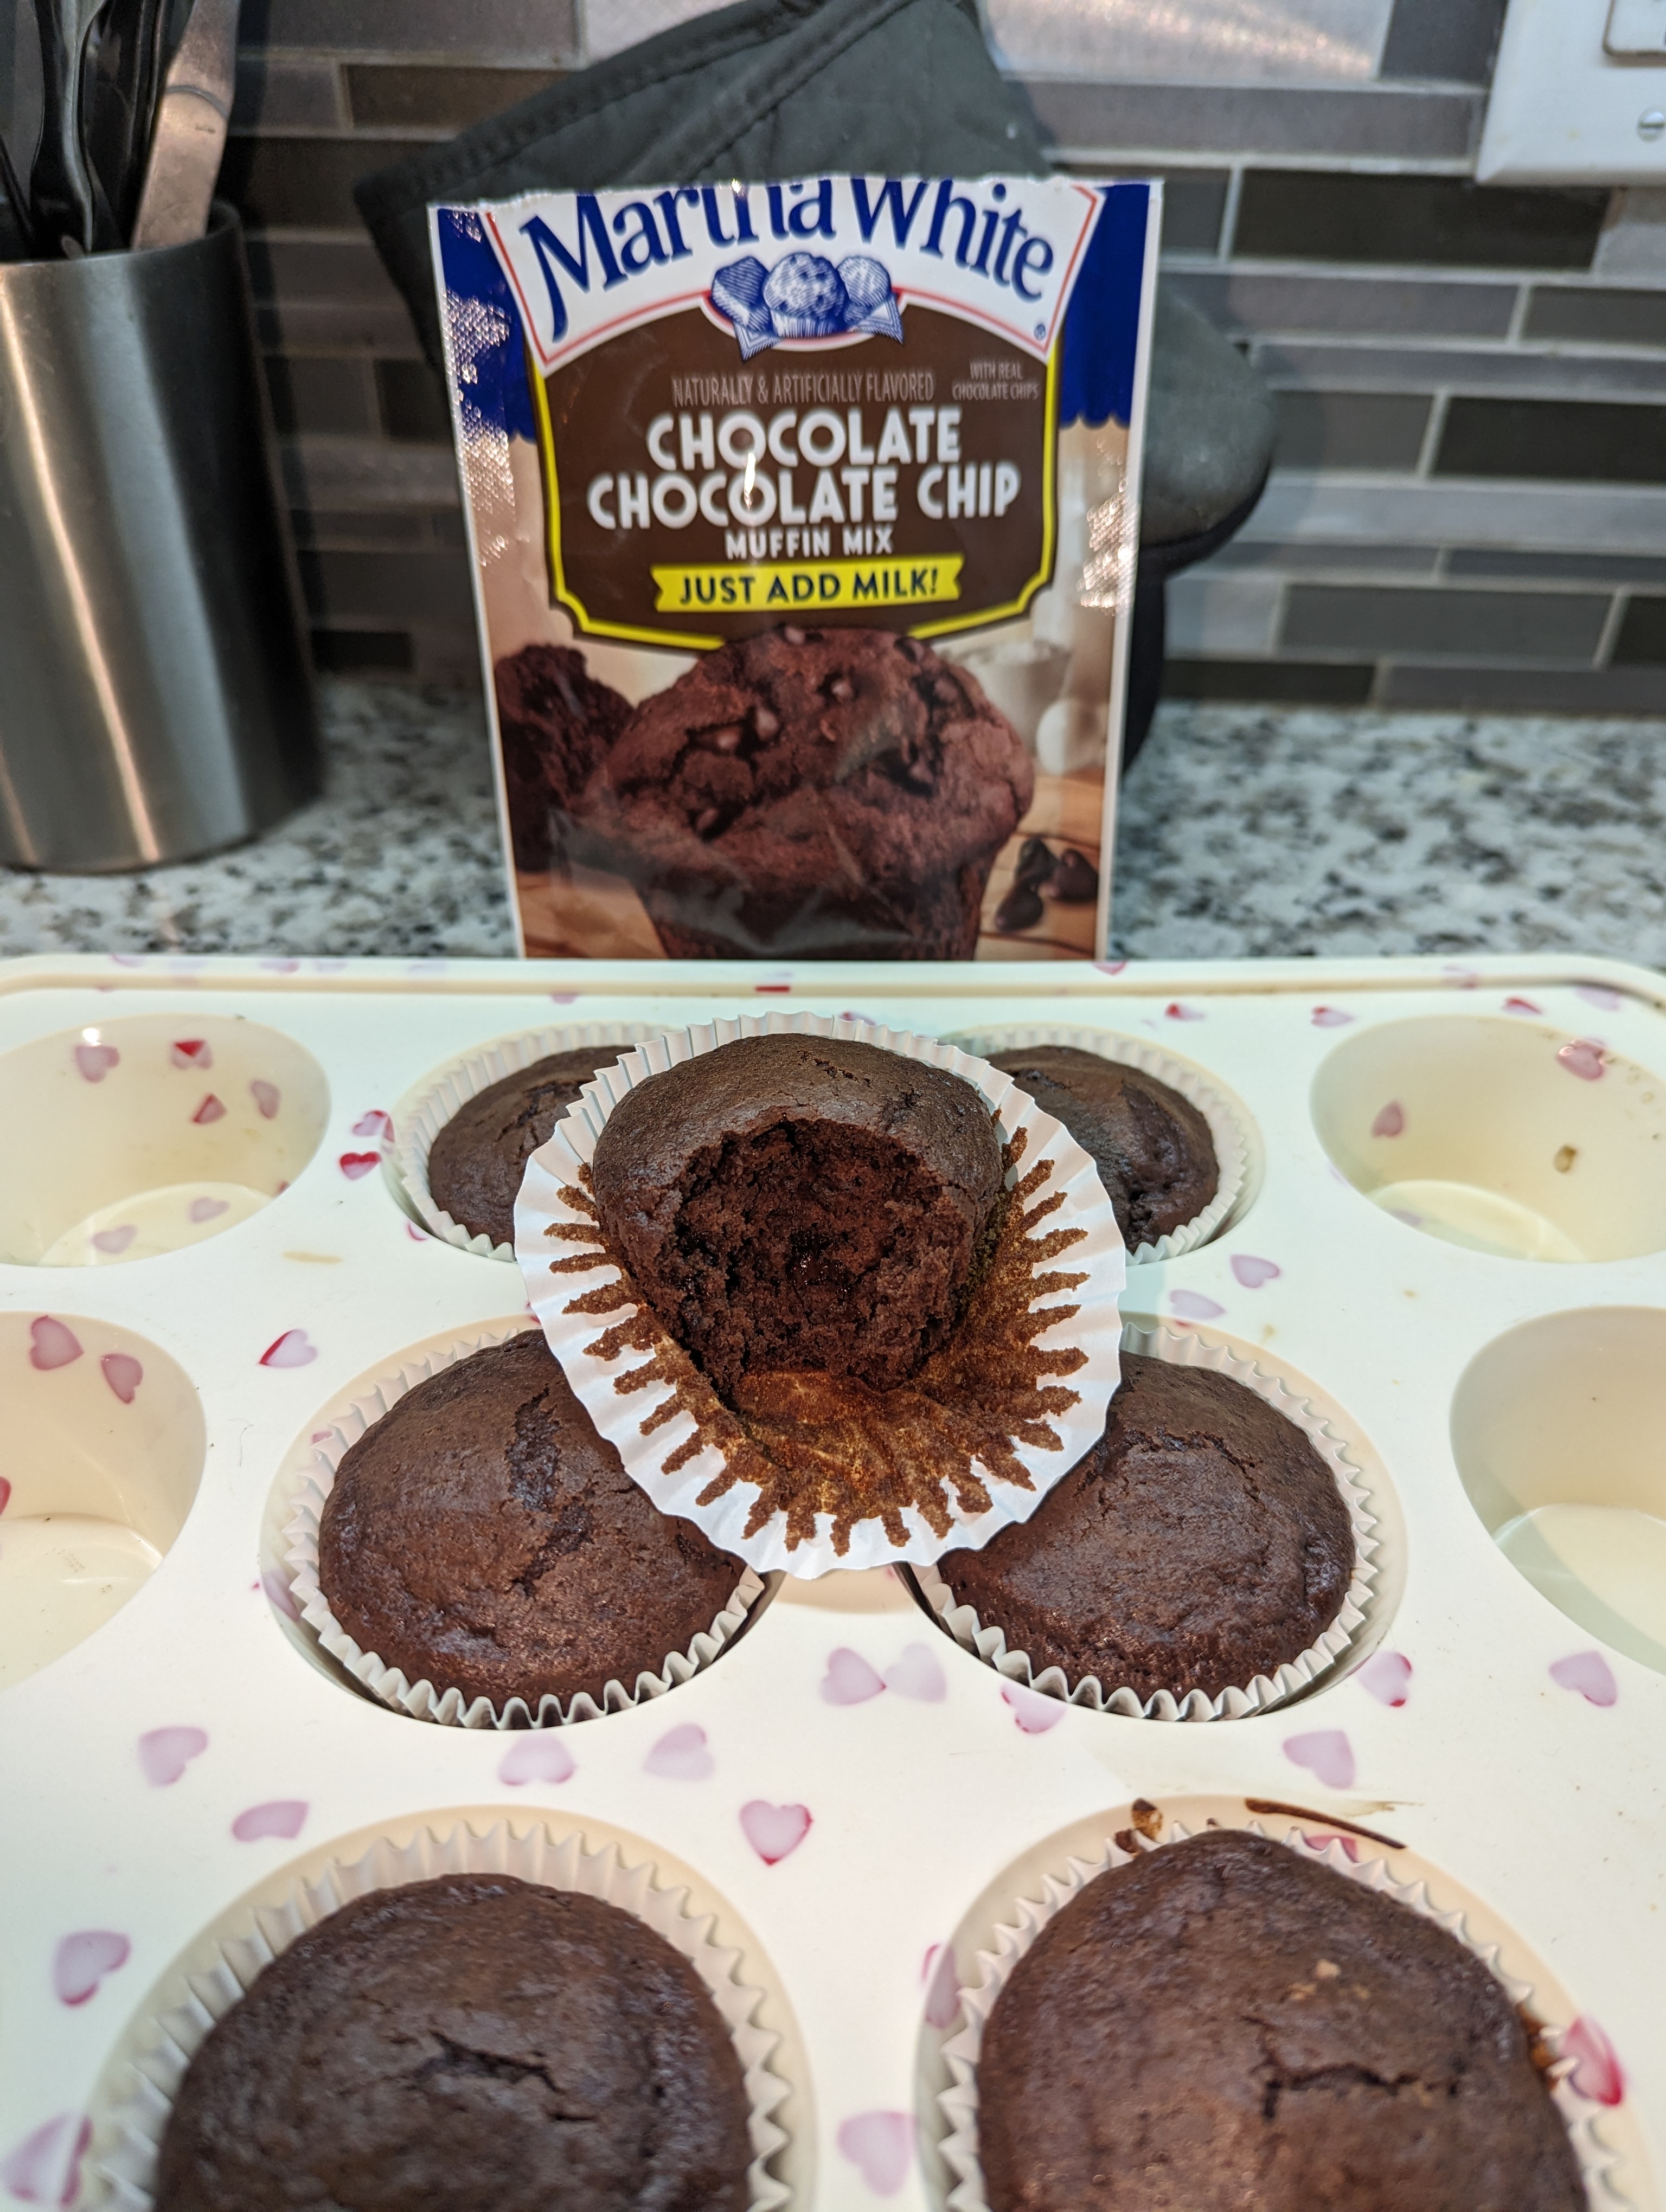 Testing out Martha Whites’ chocolate chocolate chip muffin mix